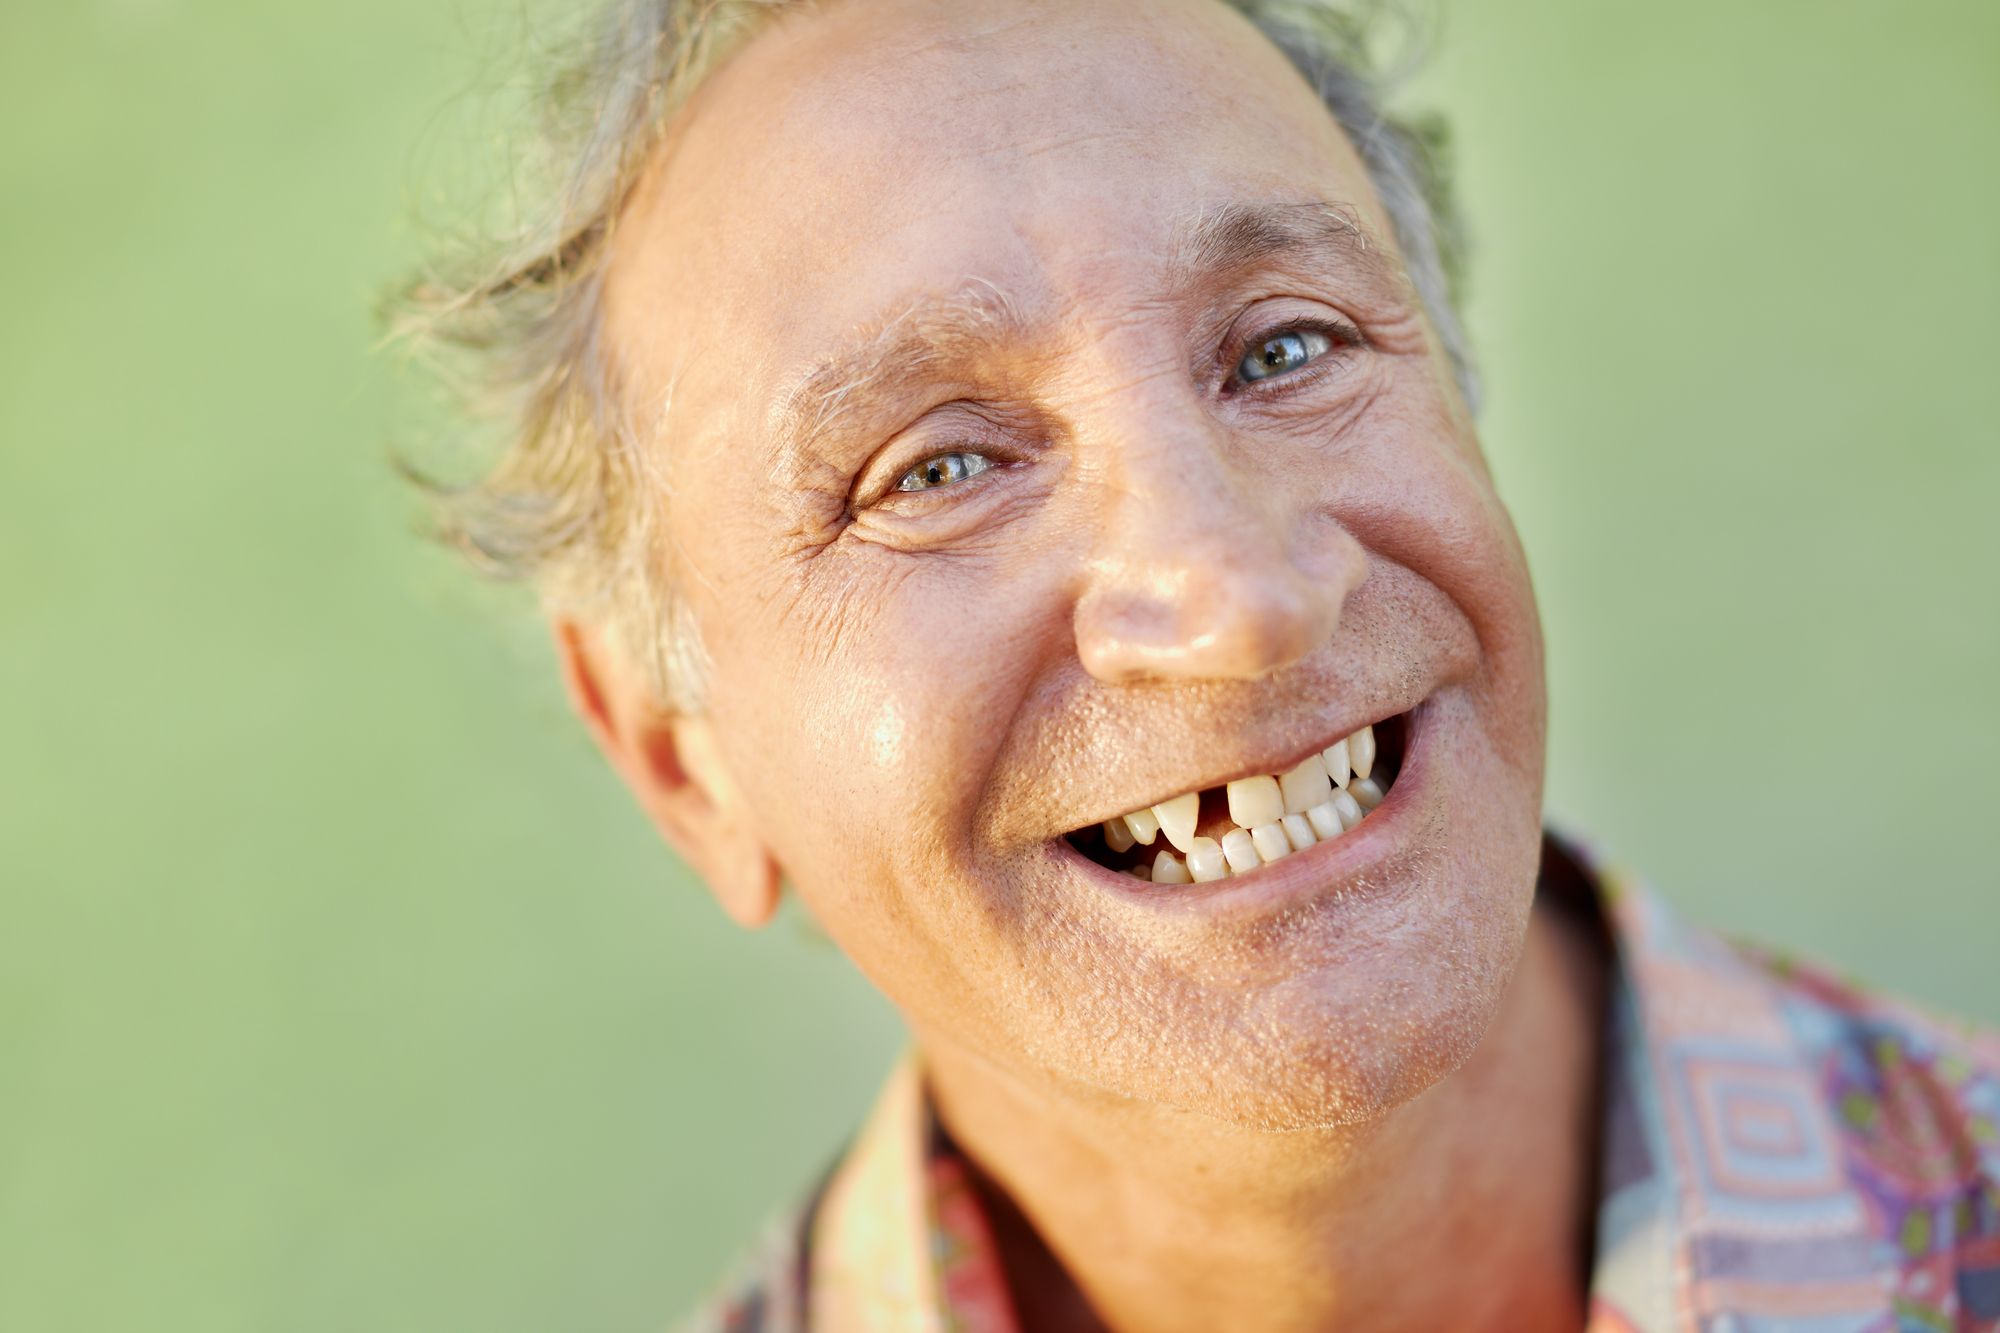 portrait of senior caucasian man with dental problems showing missing tooth and smiling. Horizontal shape, copy space